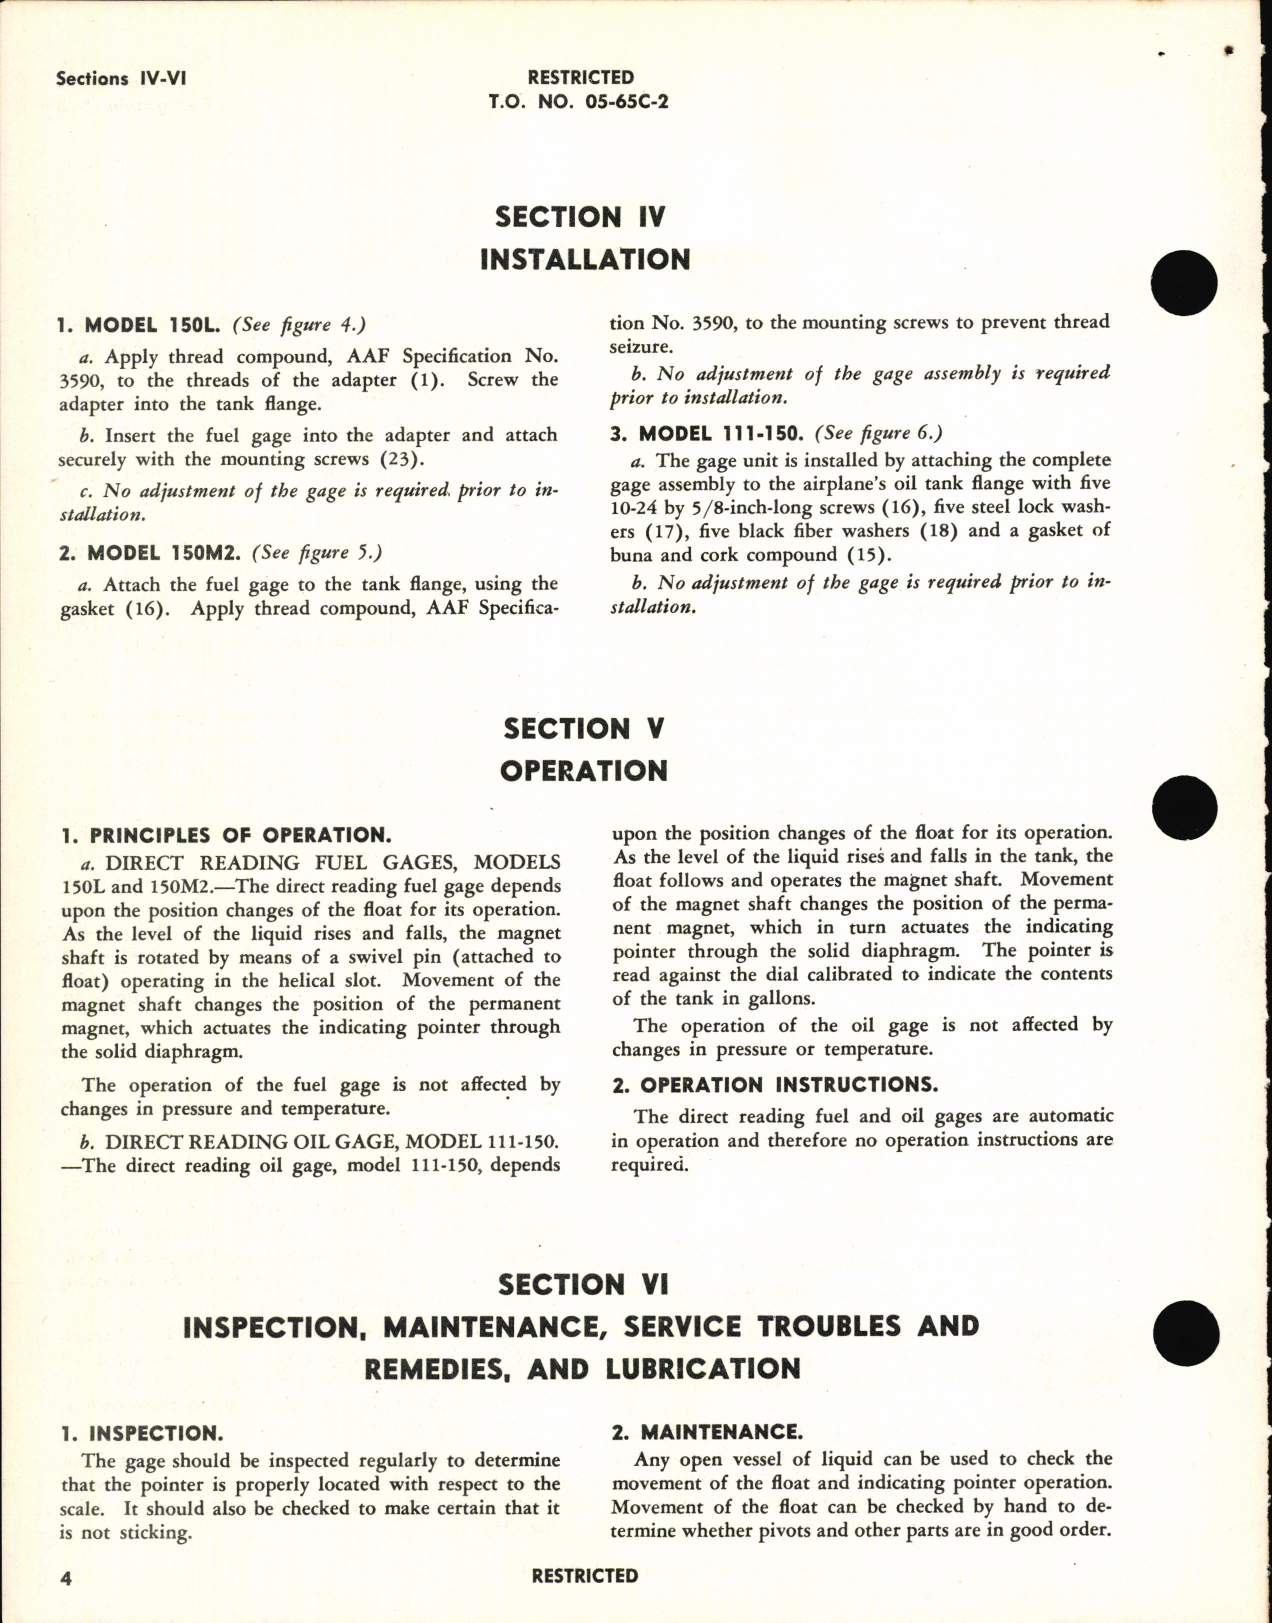 Sample page 8 from AirCorps Library document: Operation, Service, & Overhaul Inst w/ Parts Catalog for Direct Reading Fuel and Oil Gages